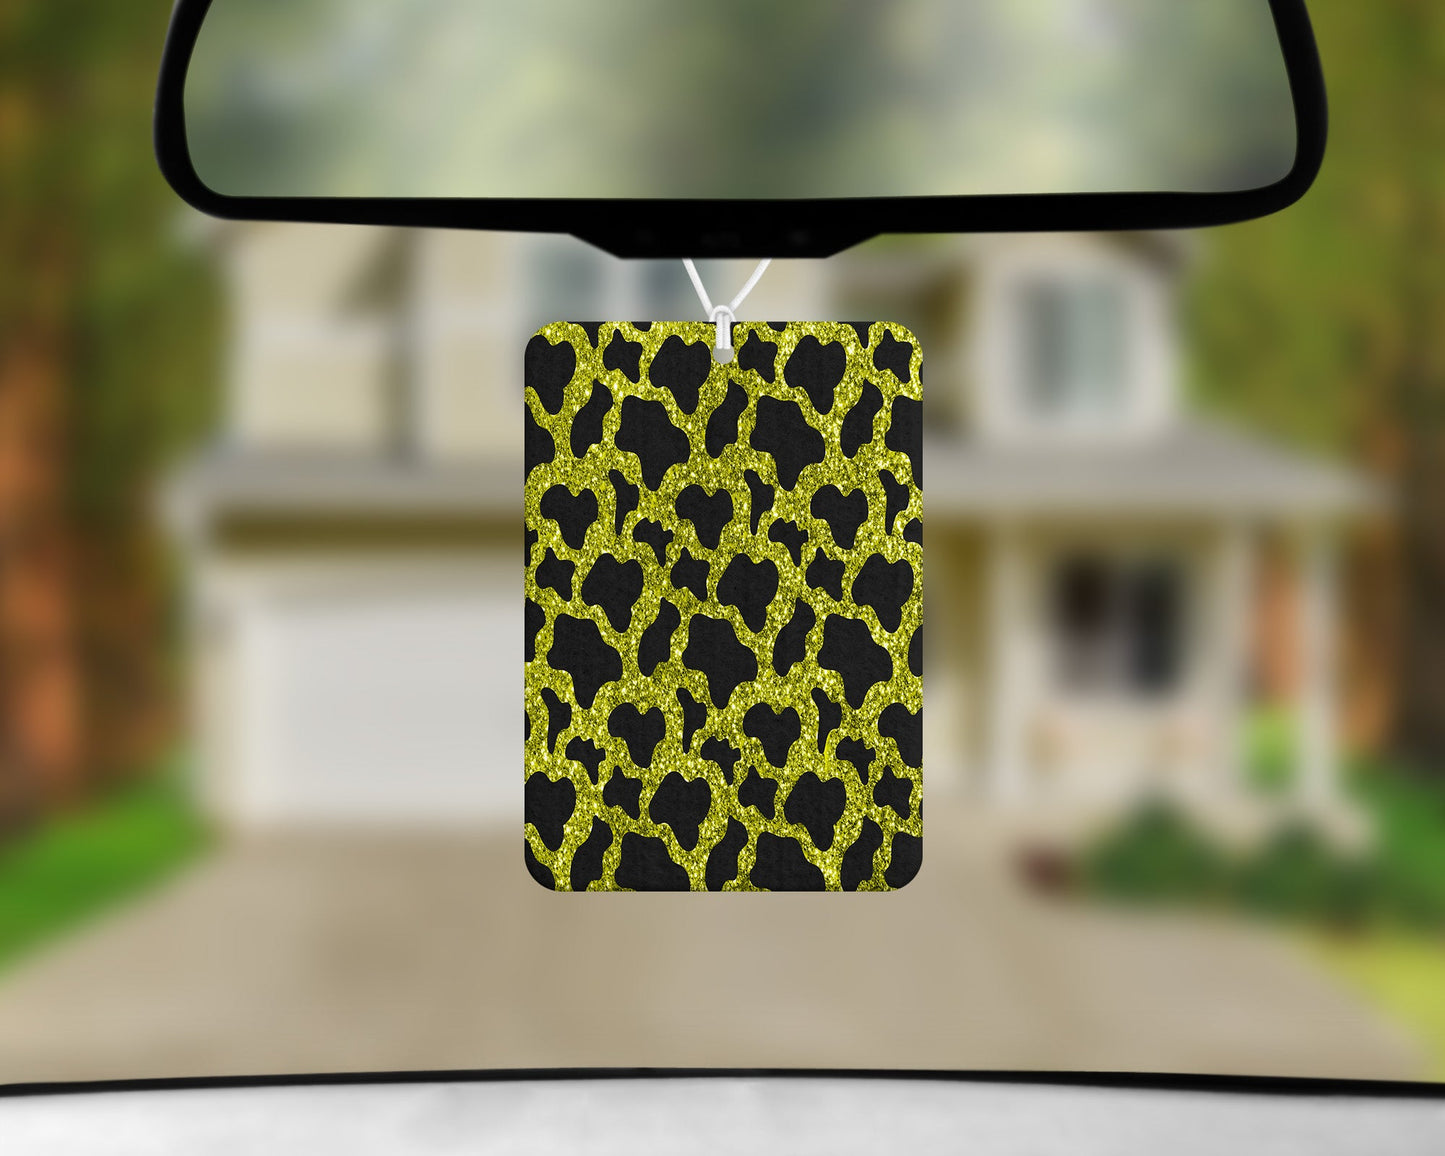 Green Glitter Cow Print|Freshie|Includes Scent Bottle - Vehicle Air Freshener